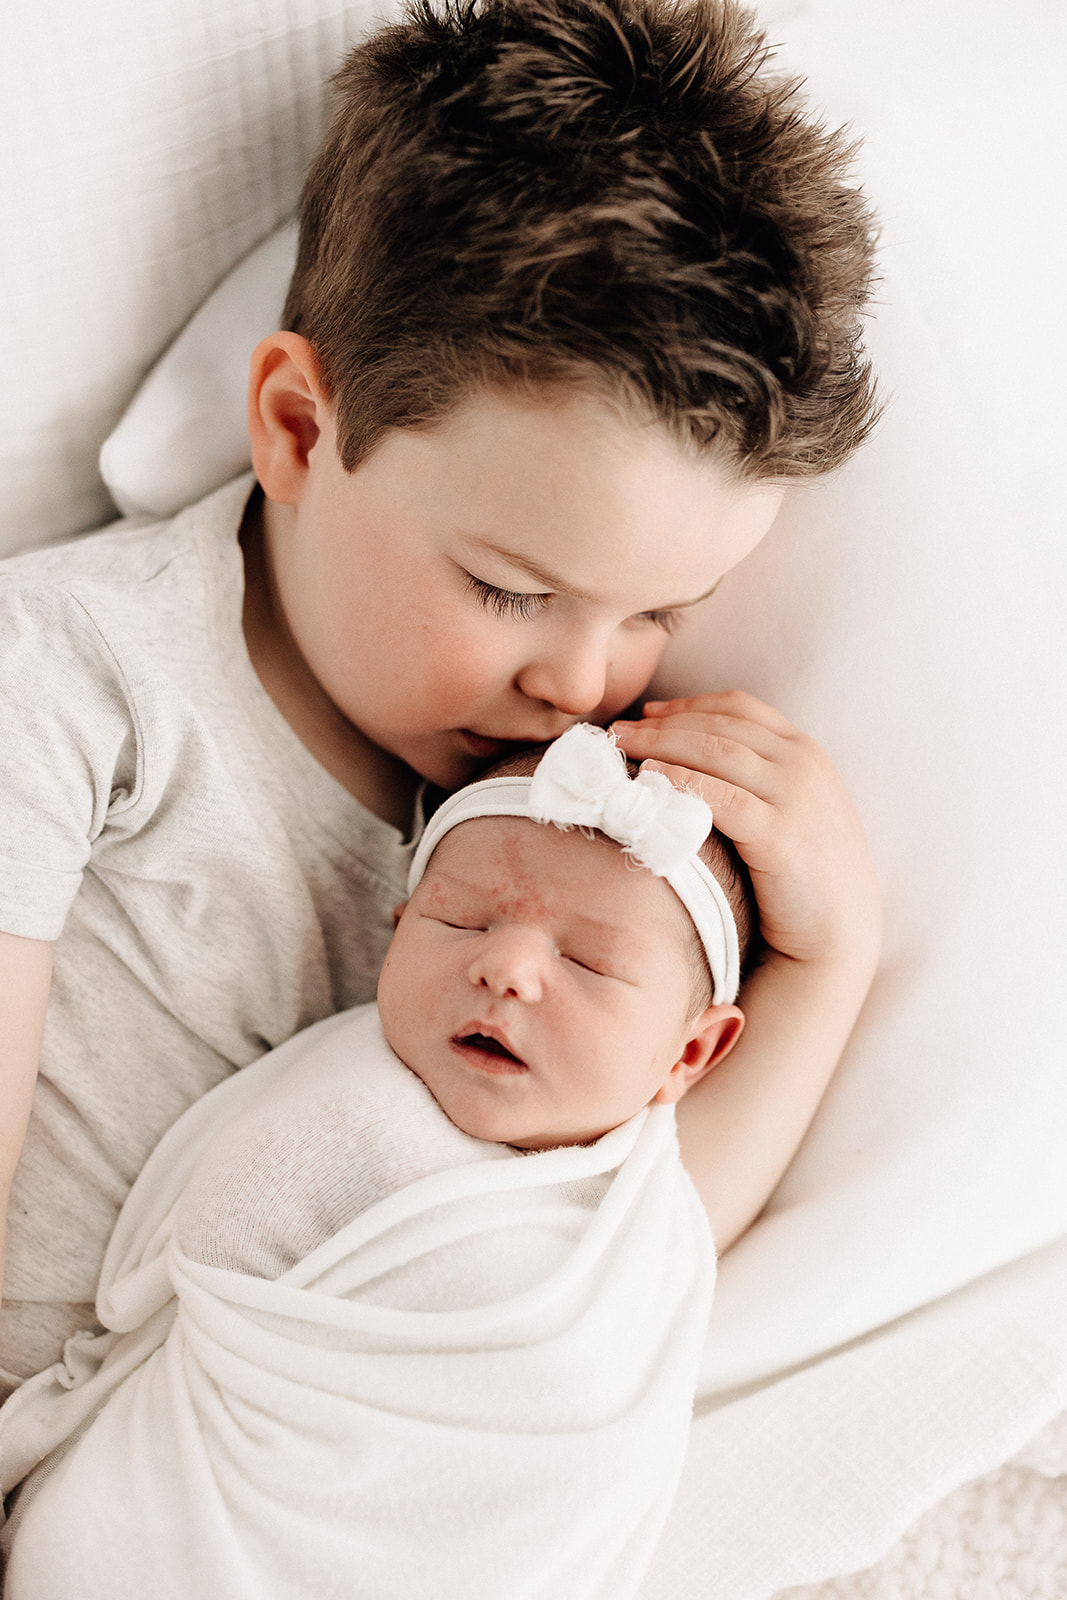 A young boy nuzzles his sleeping newborn baby sister while laying on a bed